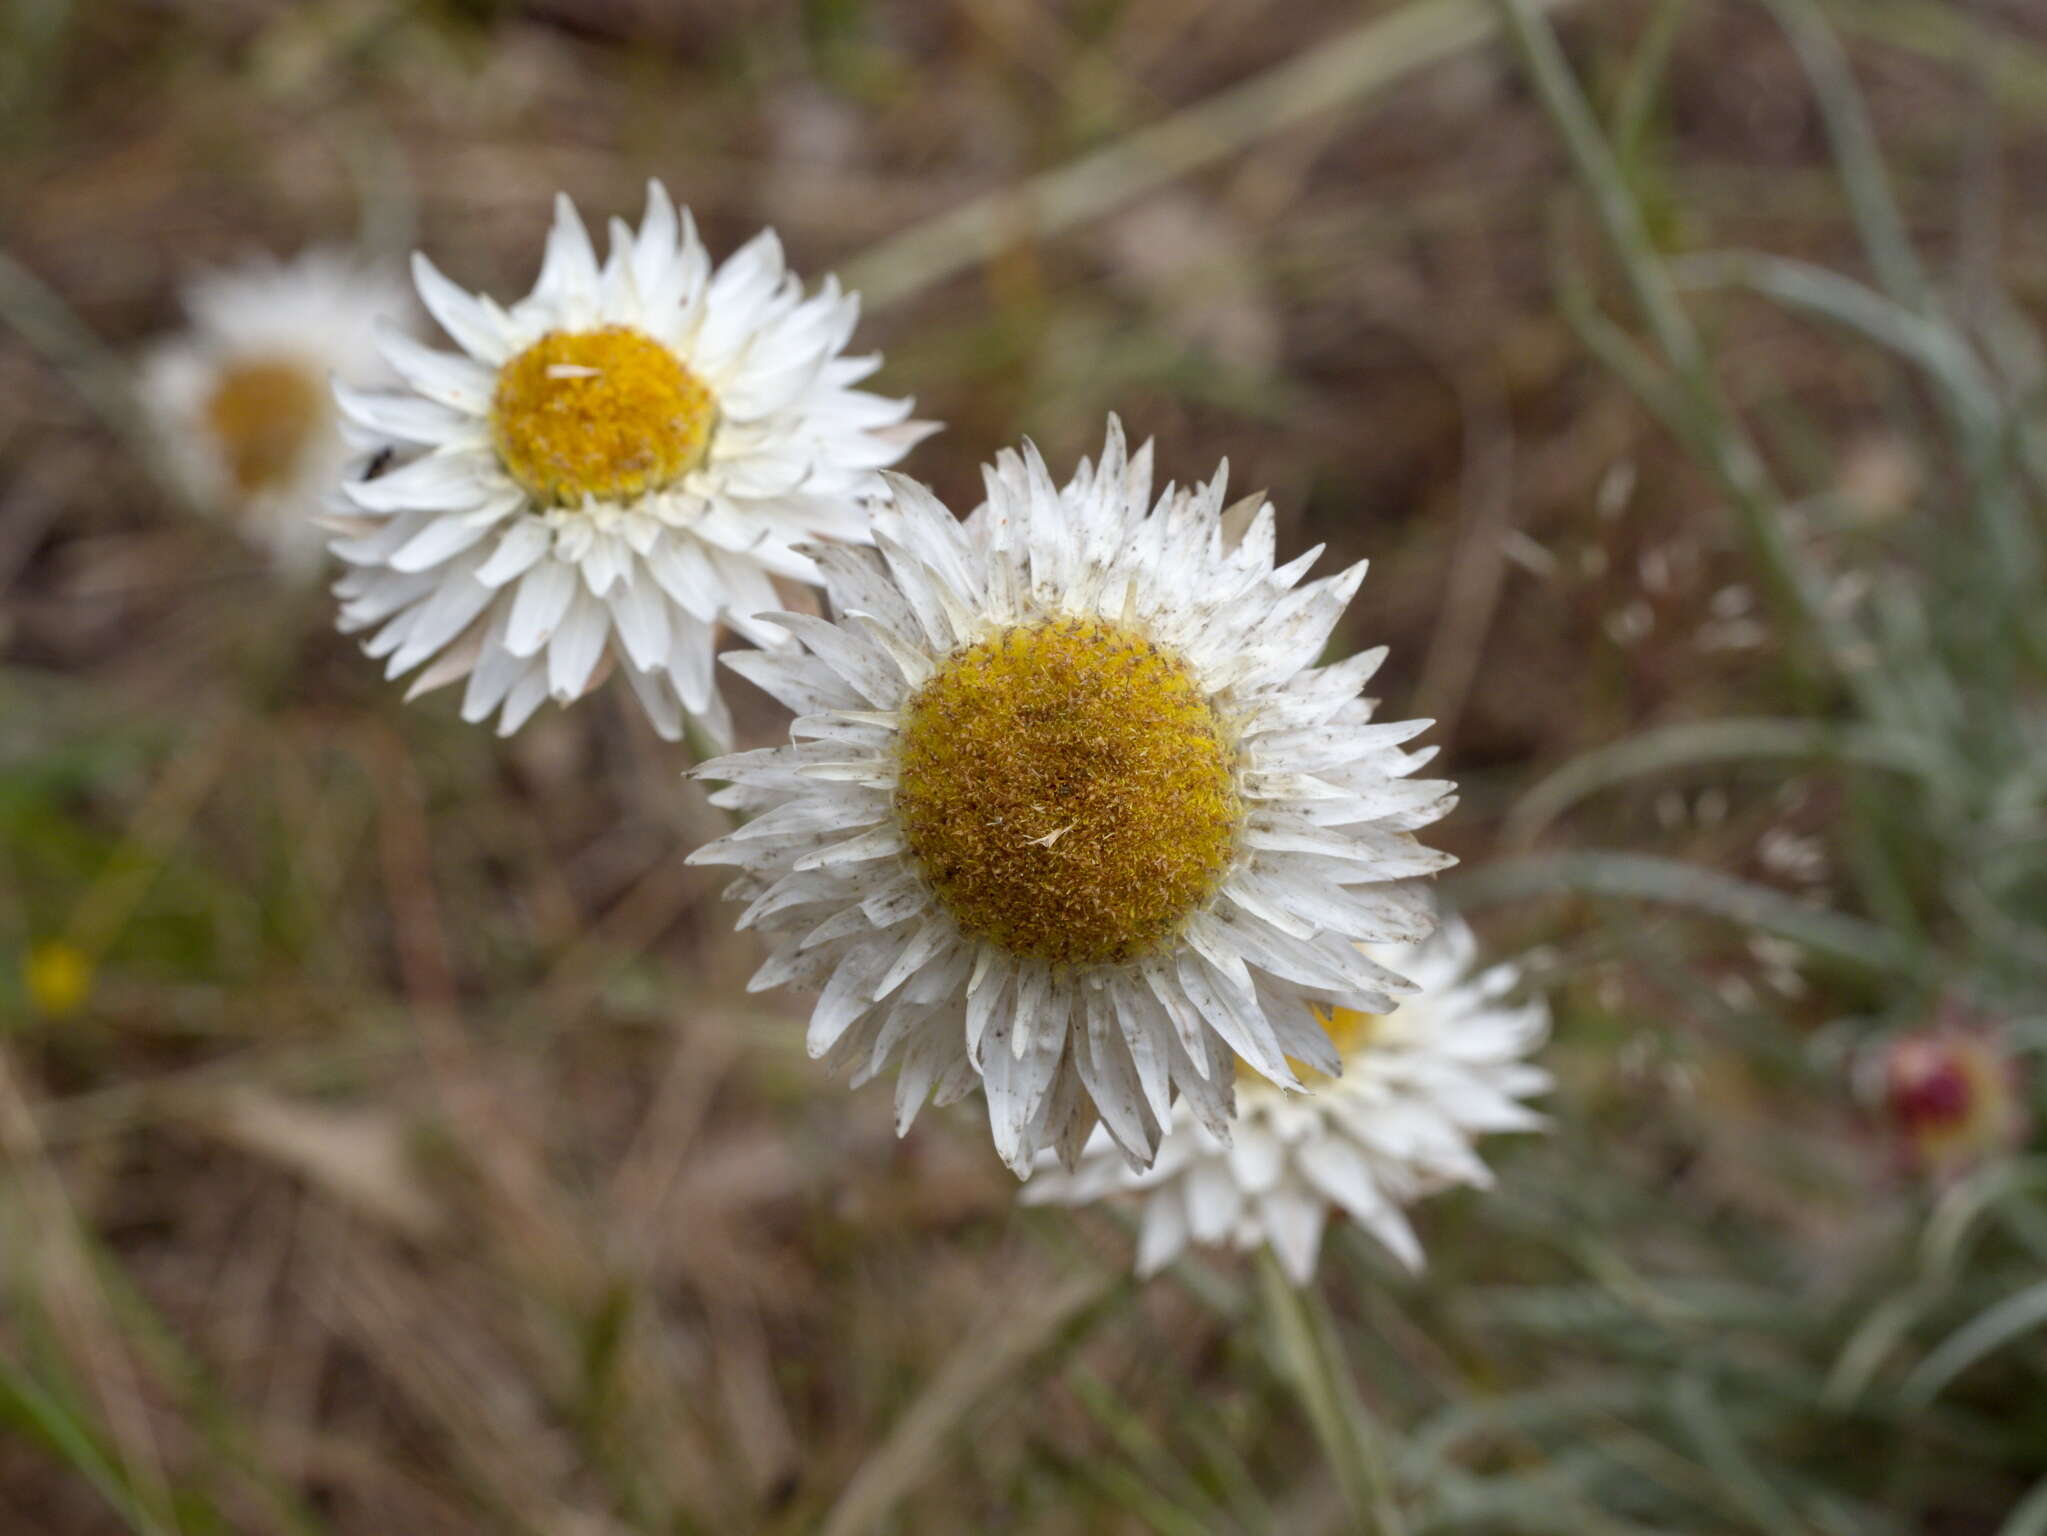 Image of Leucochrysum albicans subsp. tricolor (DC.) N. G. Walsh